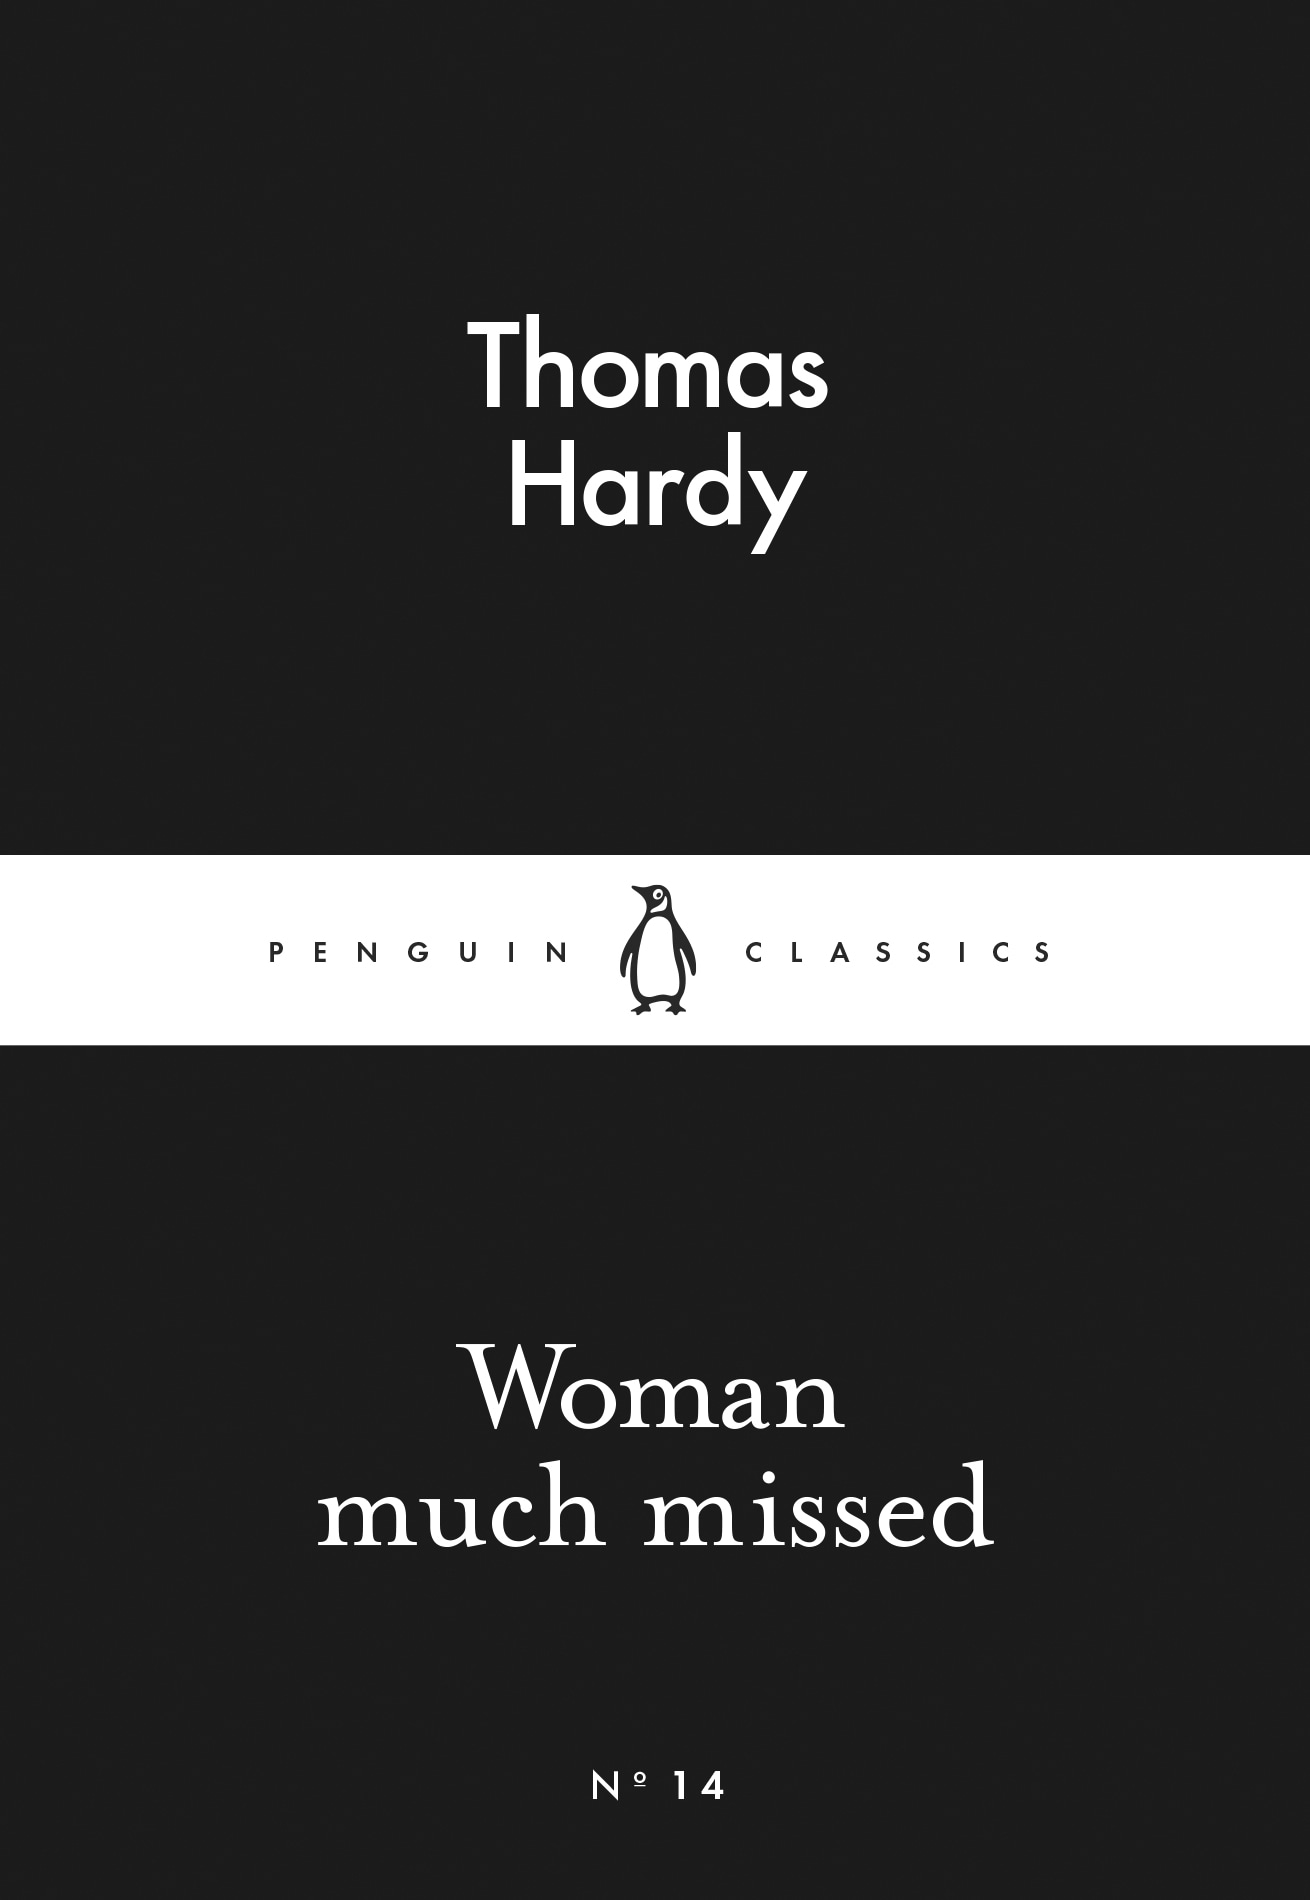 Book “Woman Much Missed” by Thomas Hardy — February 26, 2015